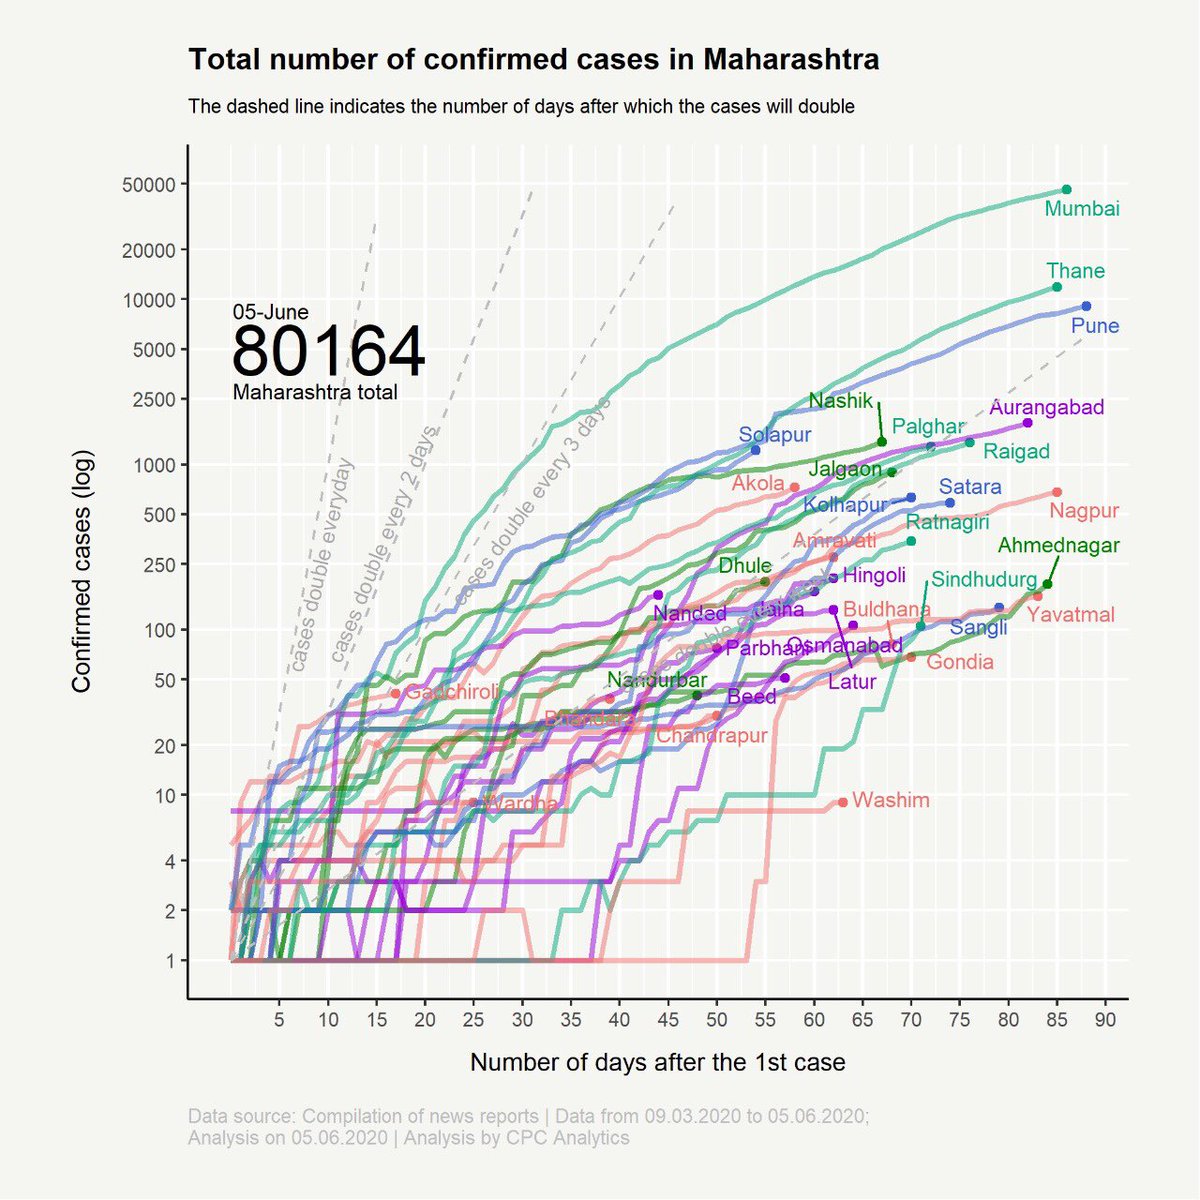 An update on the confirmed #COVID19 cases in #Maharashtra 

#Pune is showing (early) signs of #flatteningthecurve 

#Sindhudurg has shown a sharp increase 

@aparanjape @c_aashish @MulaMutha @calamur @SidShirole